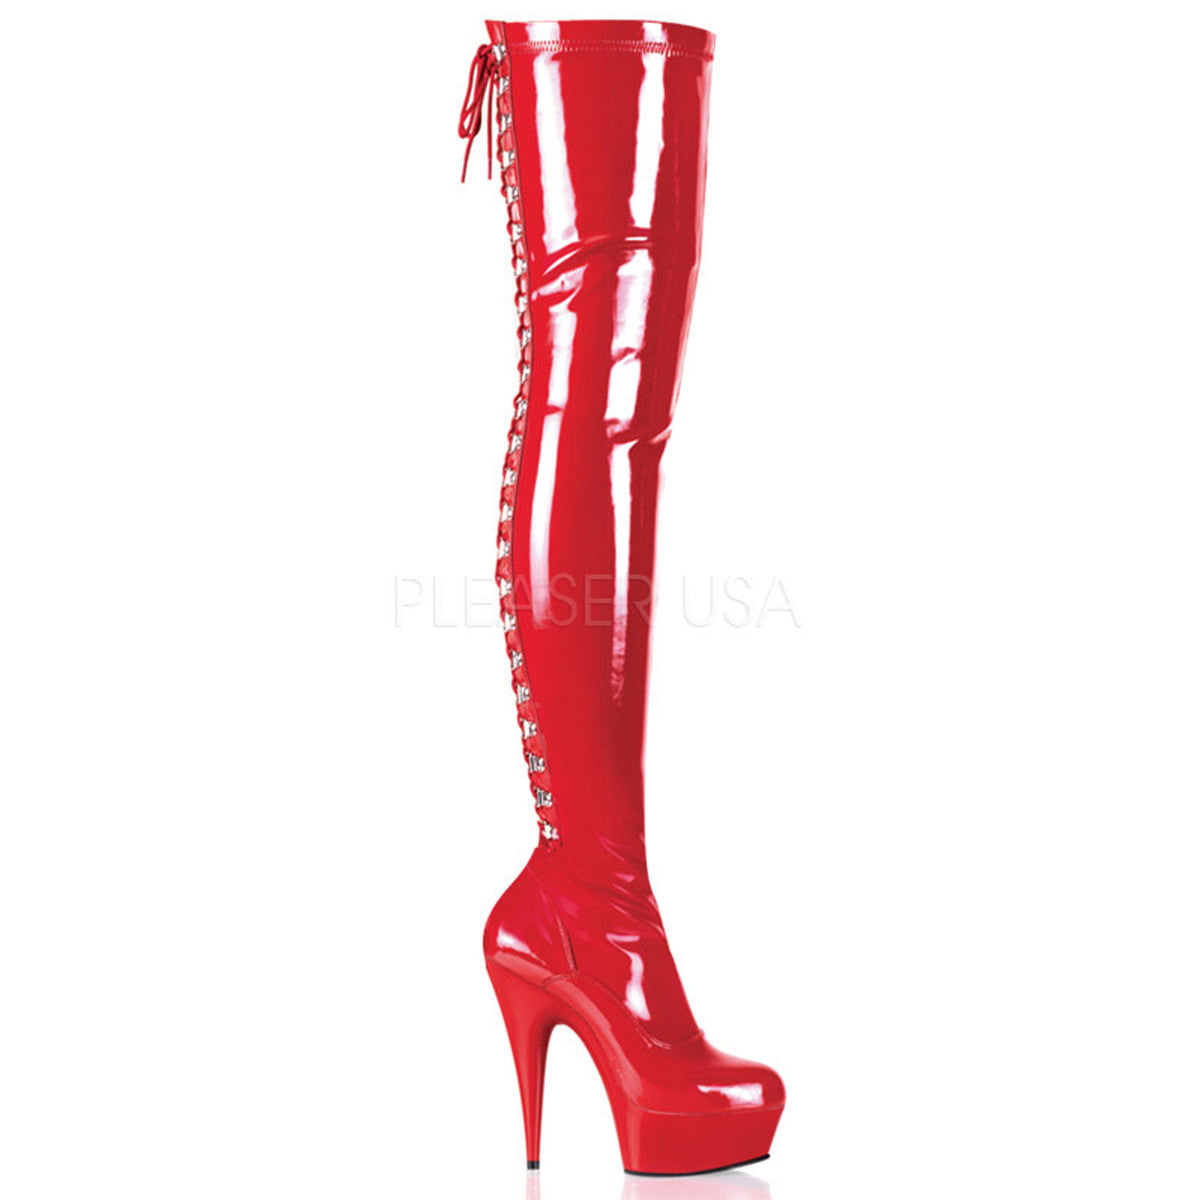 PLEASER DELIGHT-3063 Red Stretch Pat-Red Thigh High Boots - Shoecup.com